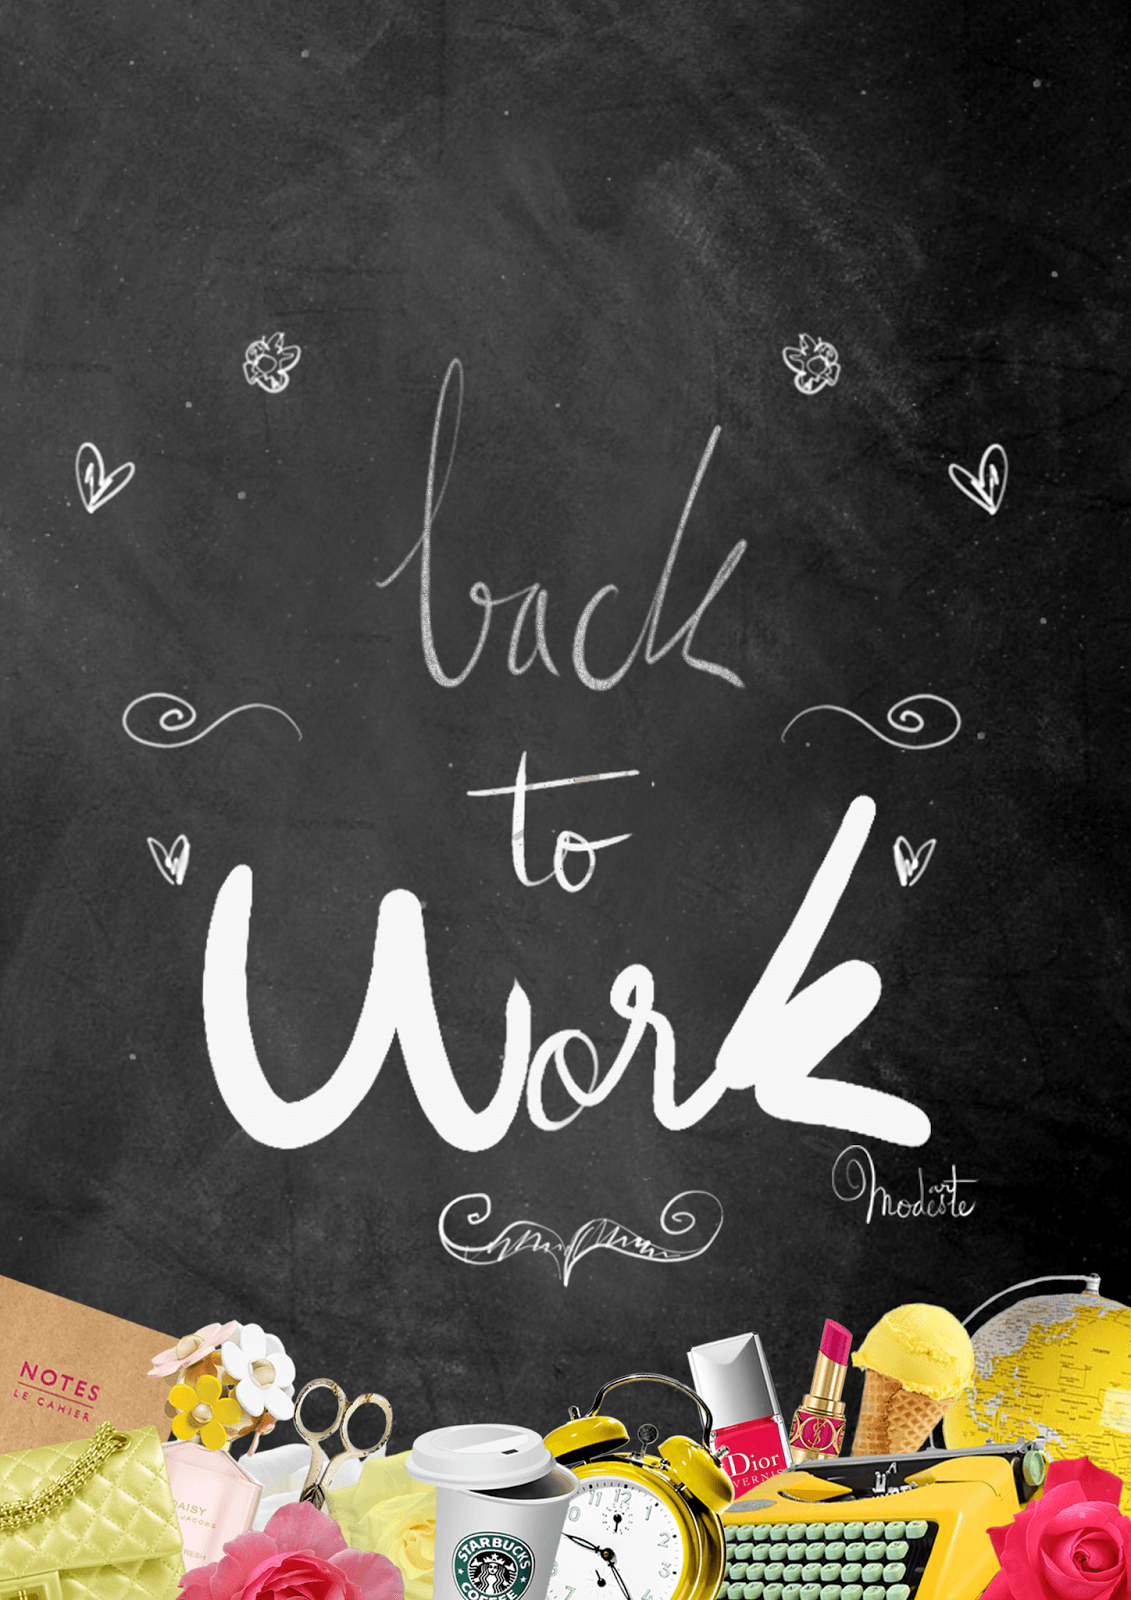 Free Download Wallpaper Back to School. Back to school wallpaper, Wallpaper, Back to work